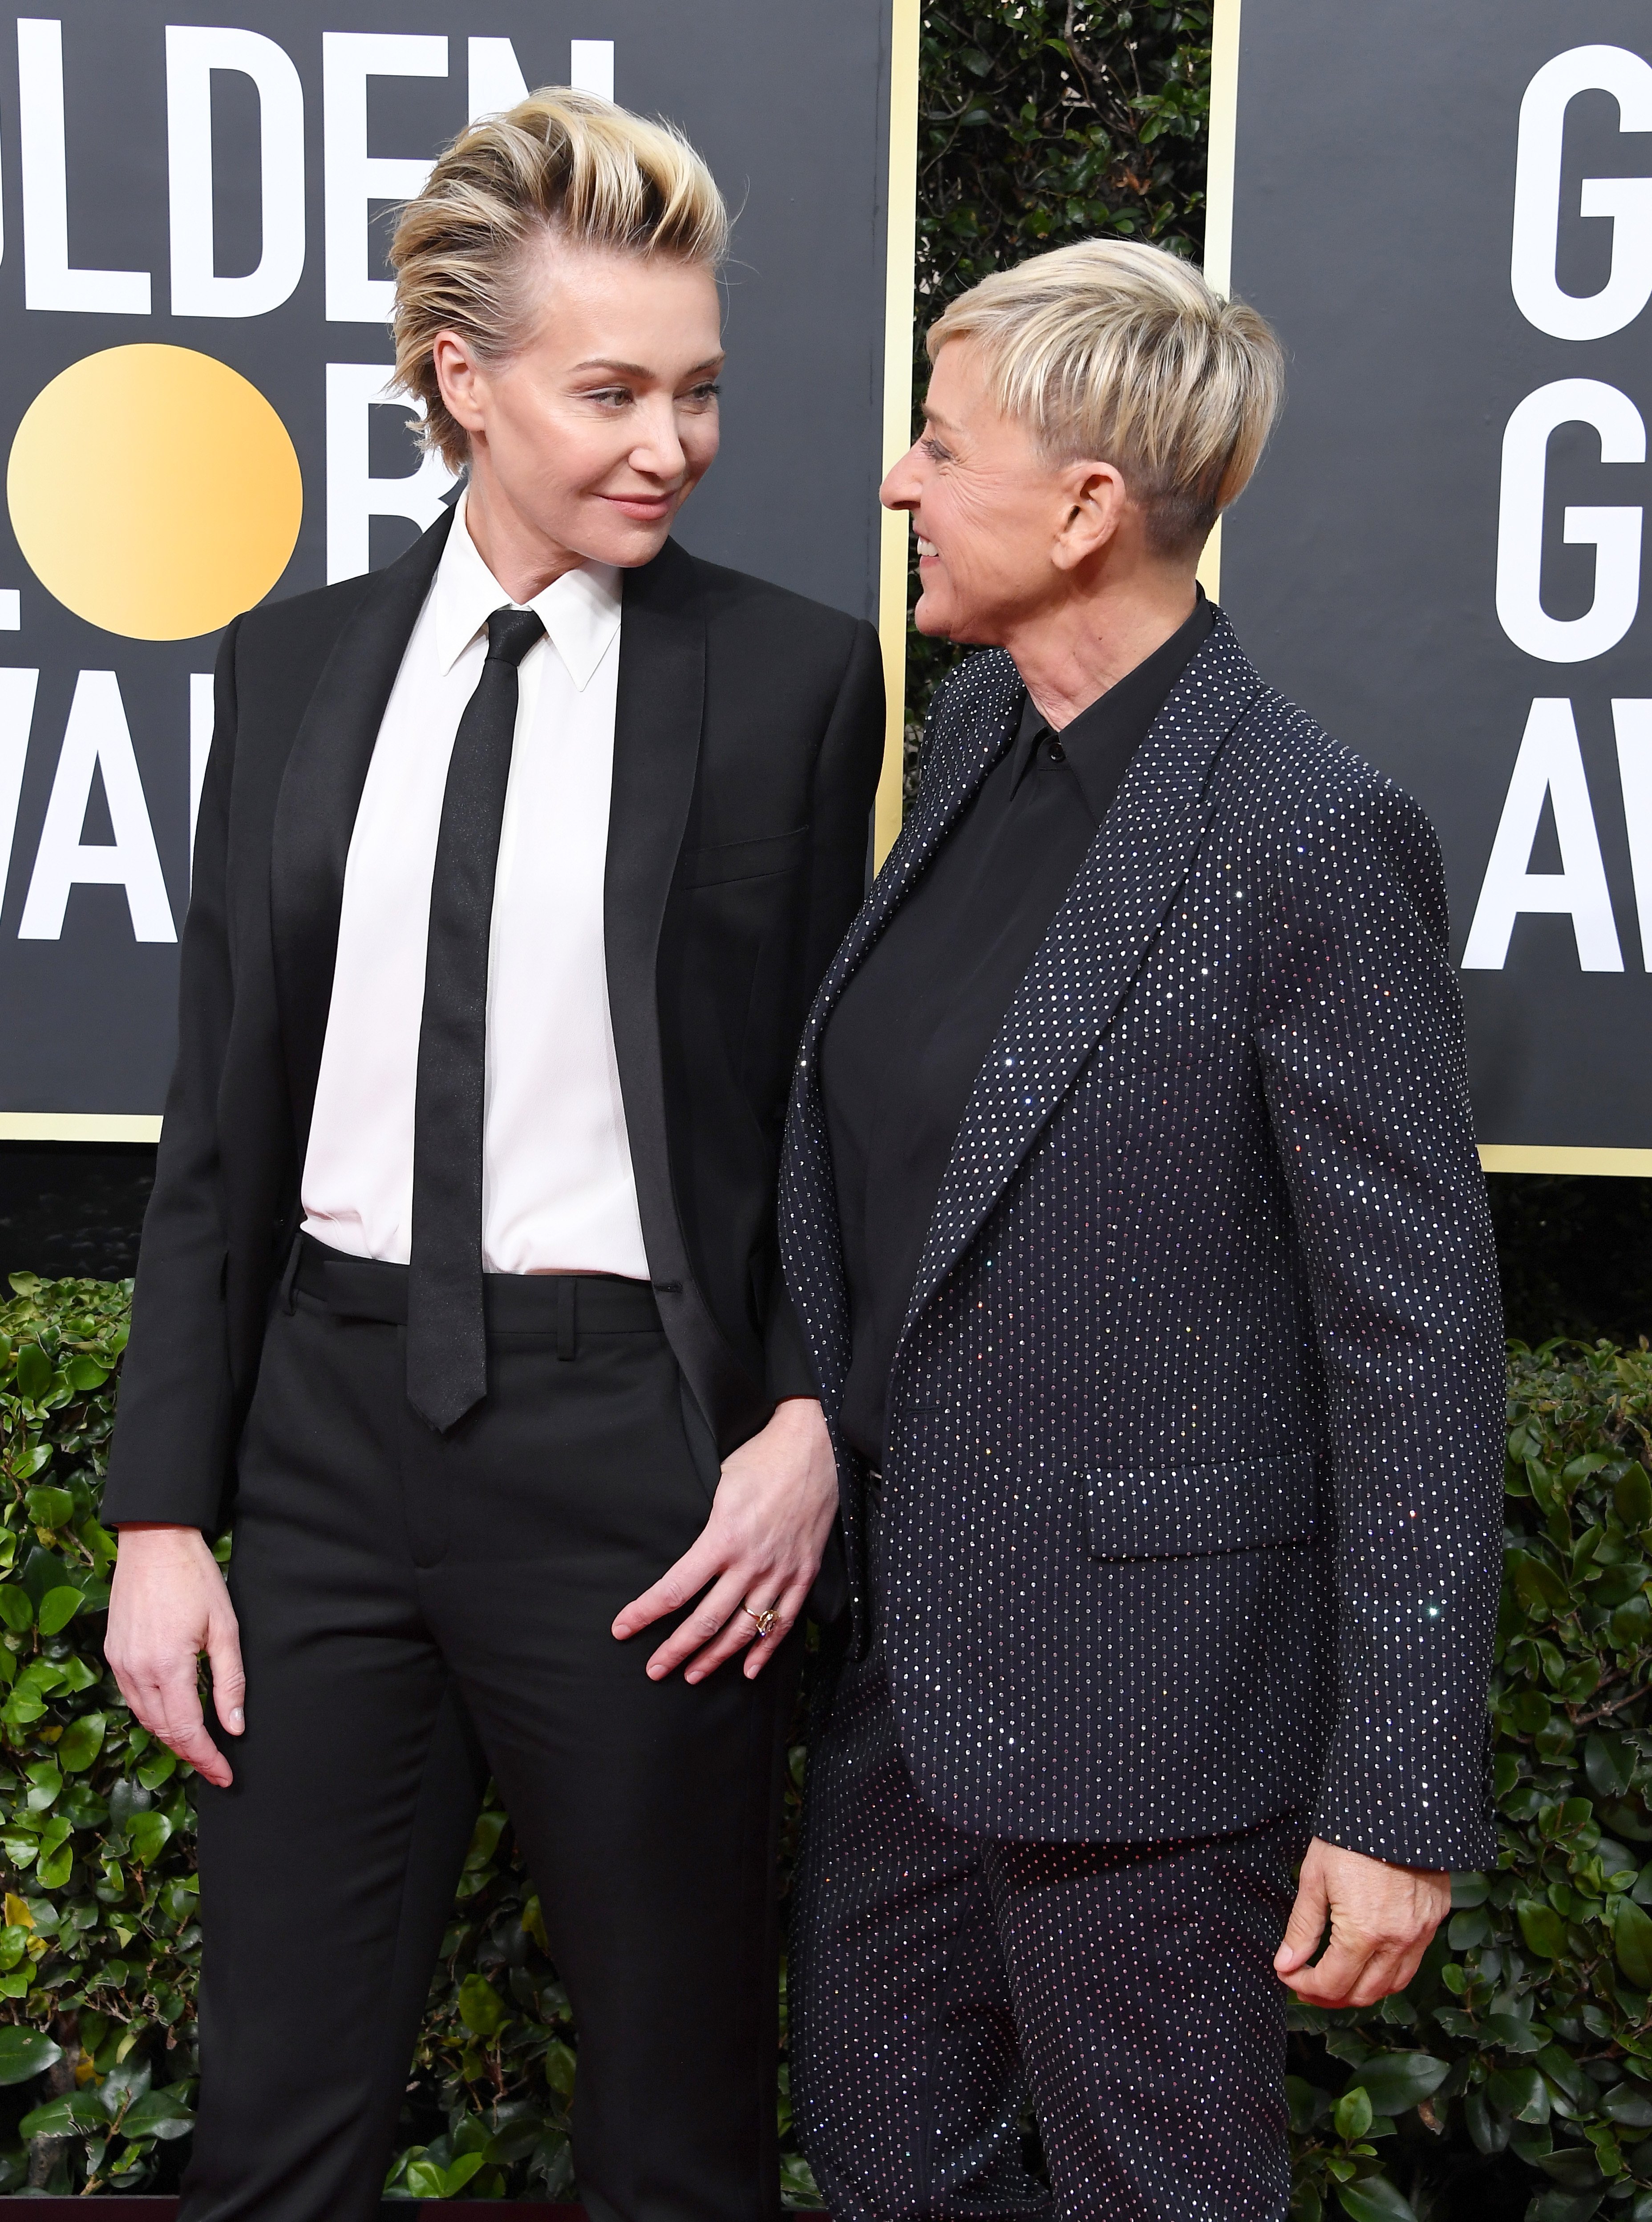  Portia de Rossi and Ellen DeGeneres arrives at the 77th Annual Golden Globe Awards attends the 77th Annual Golden Globe Awards on January 05, 2020 | Photo: Getty Images